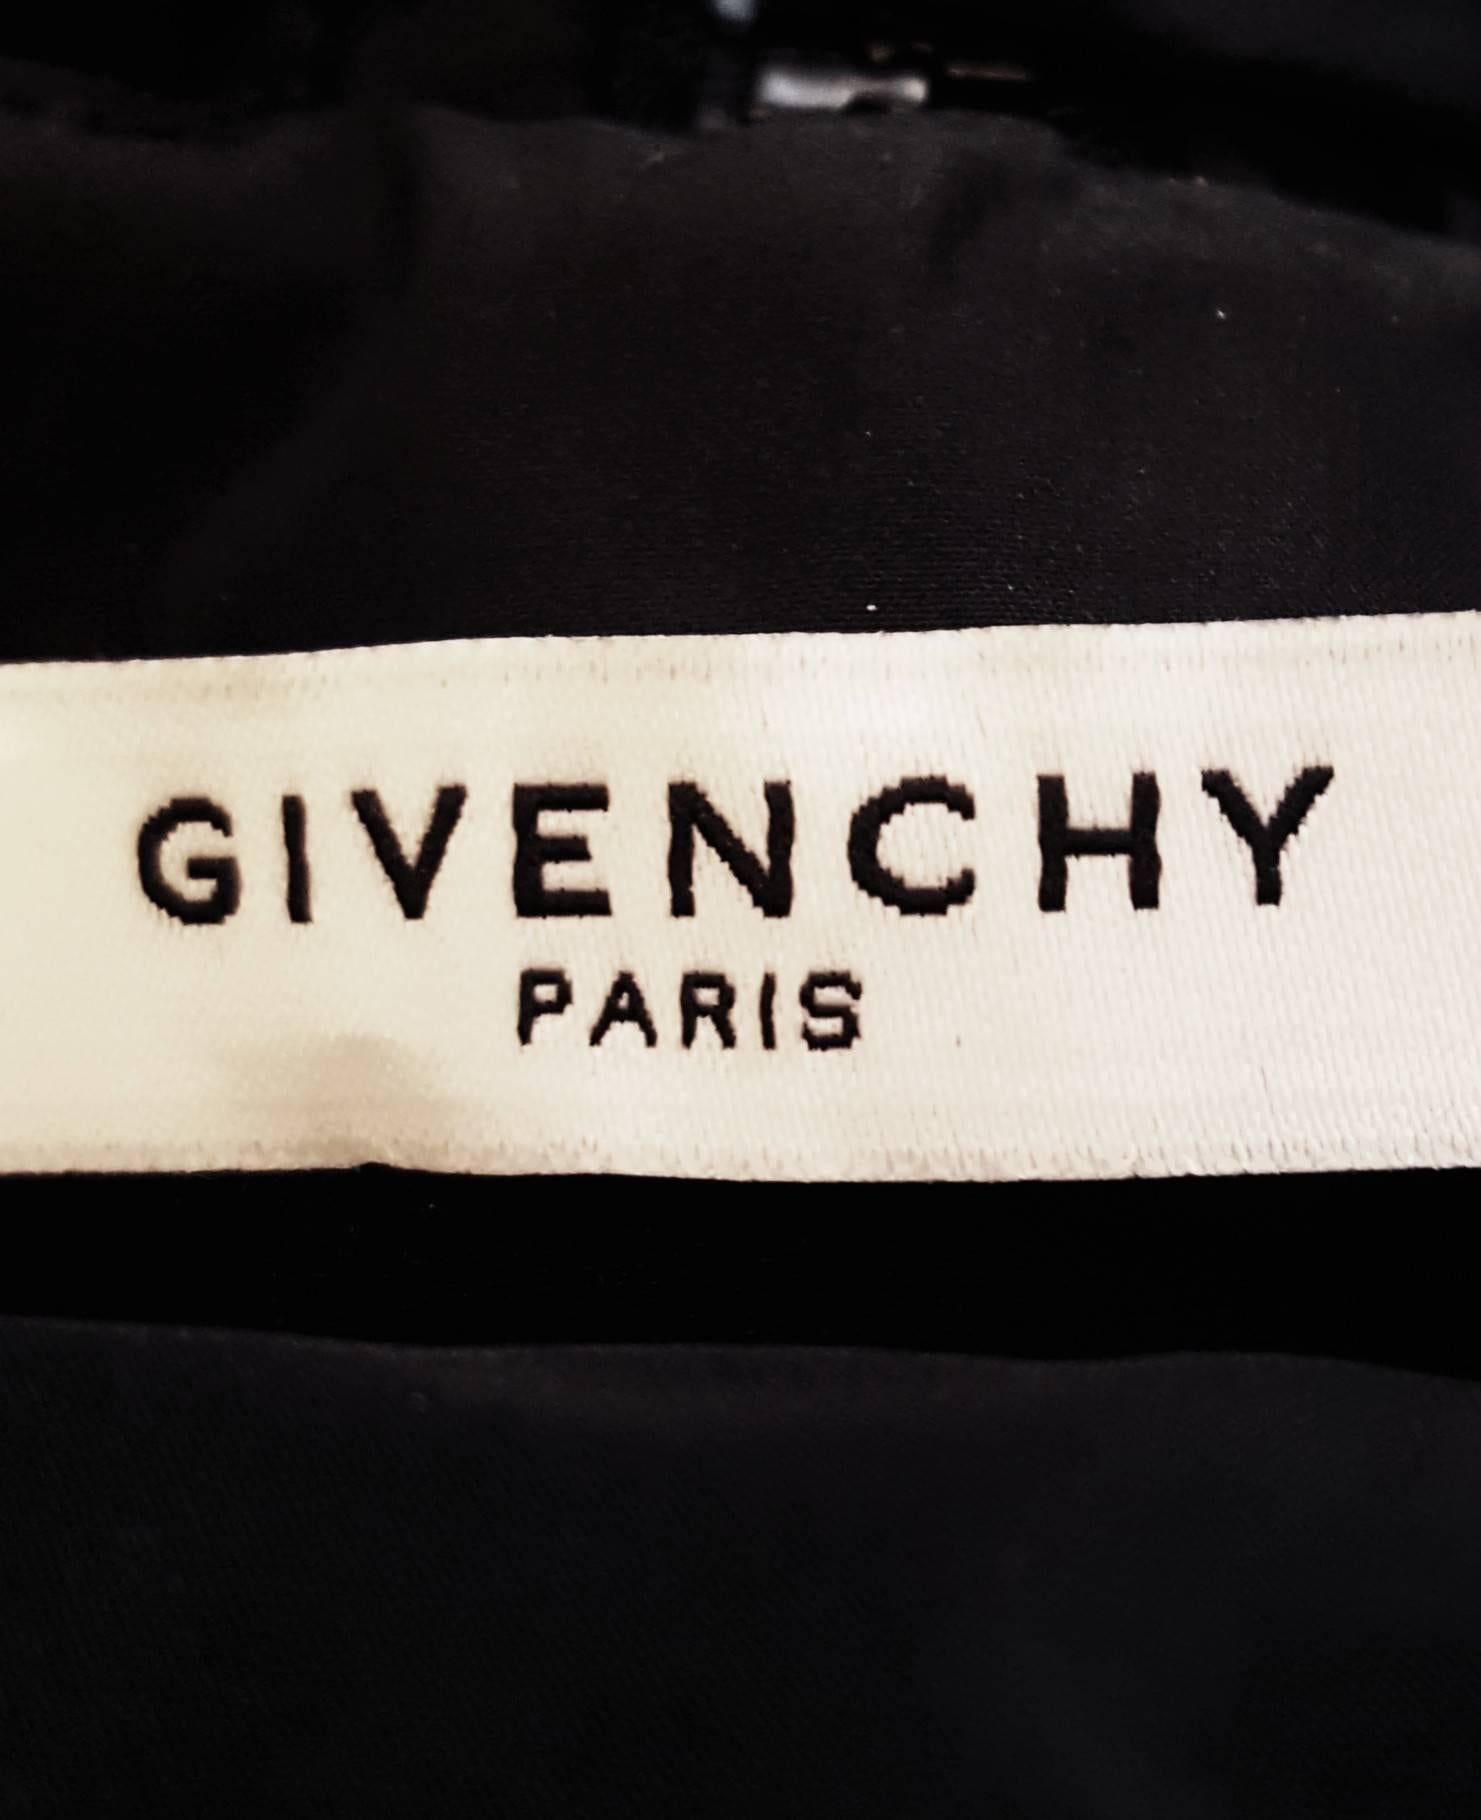 Givenchy Black Pleated Jacket with Multiple Zippers at Waist / Collar / Front 3